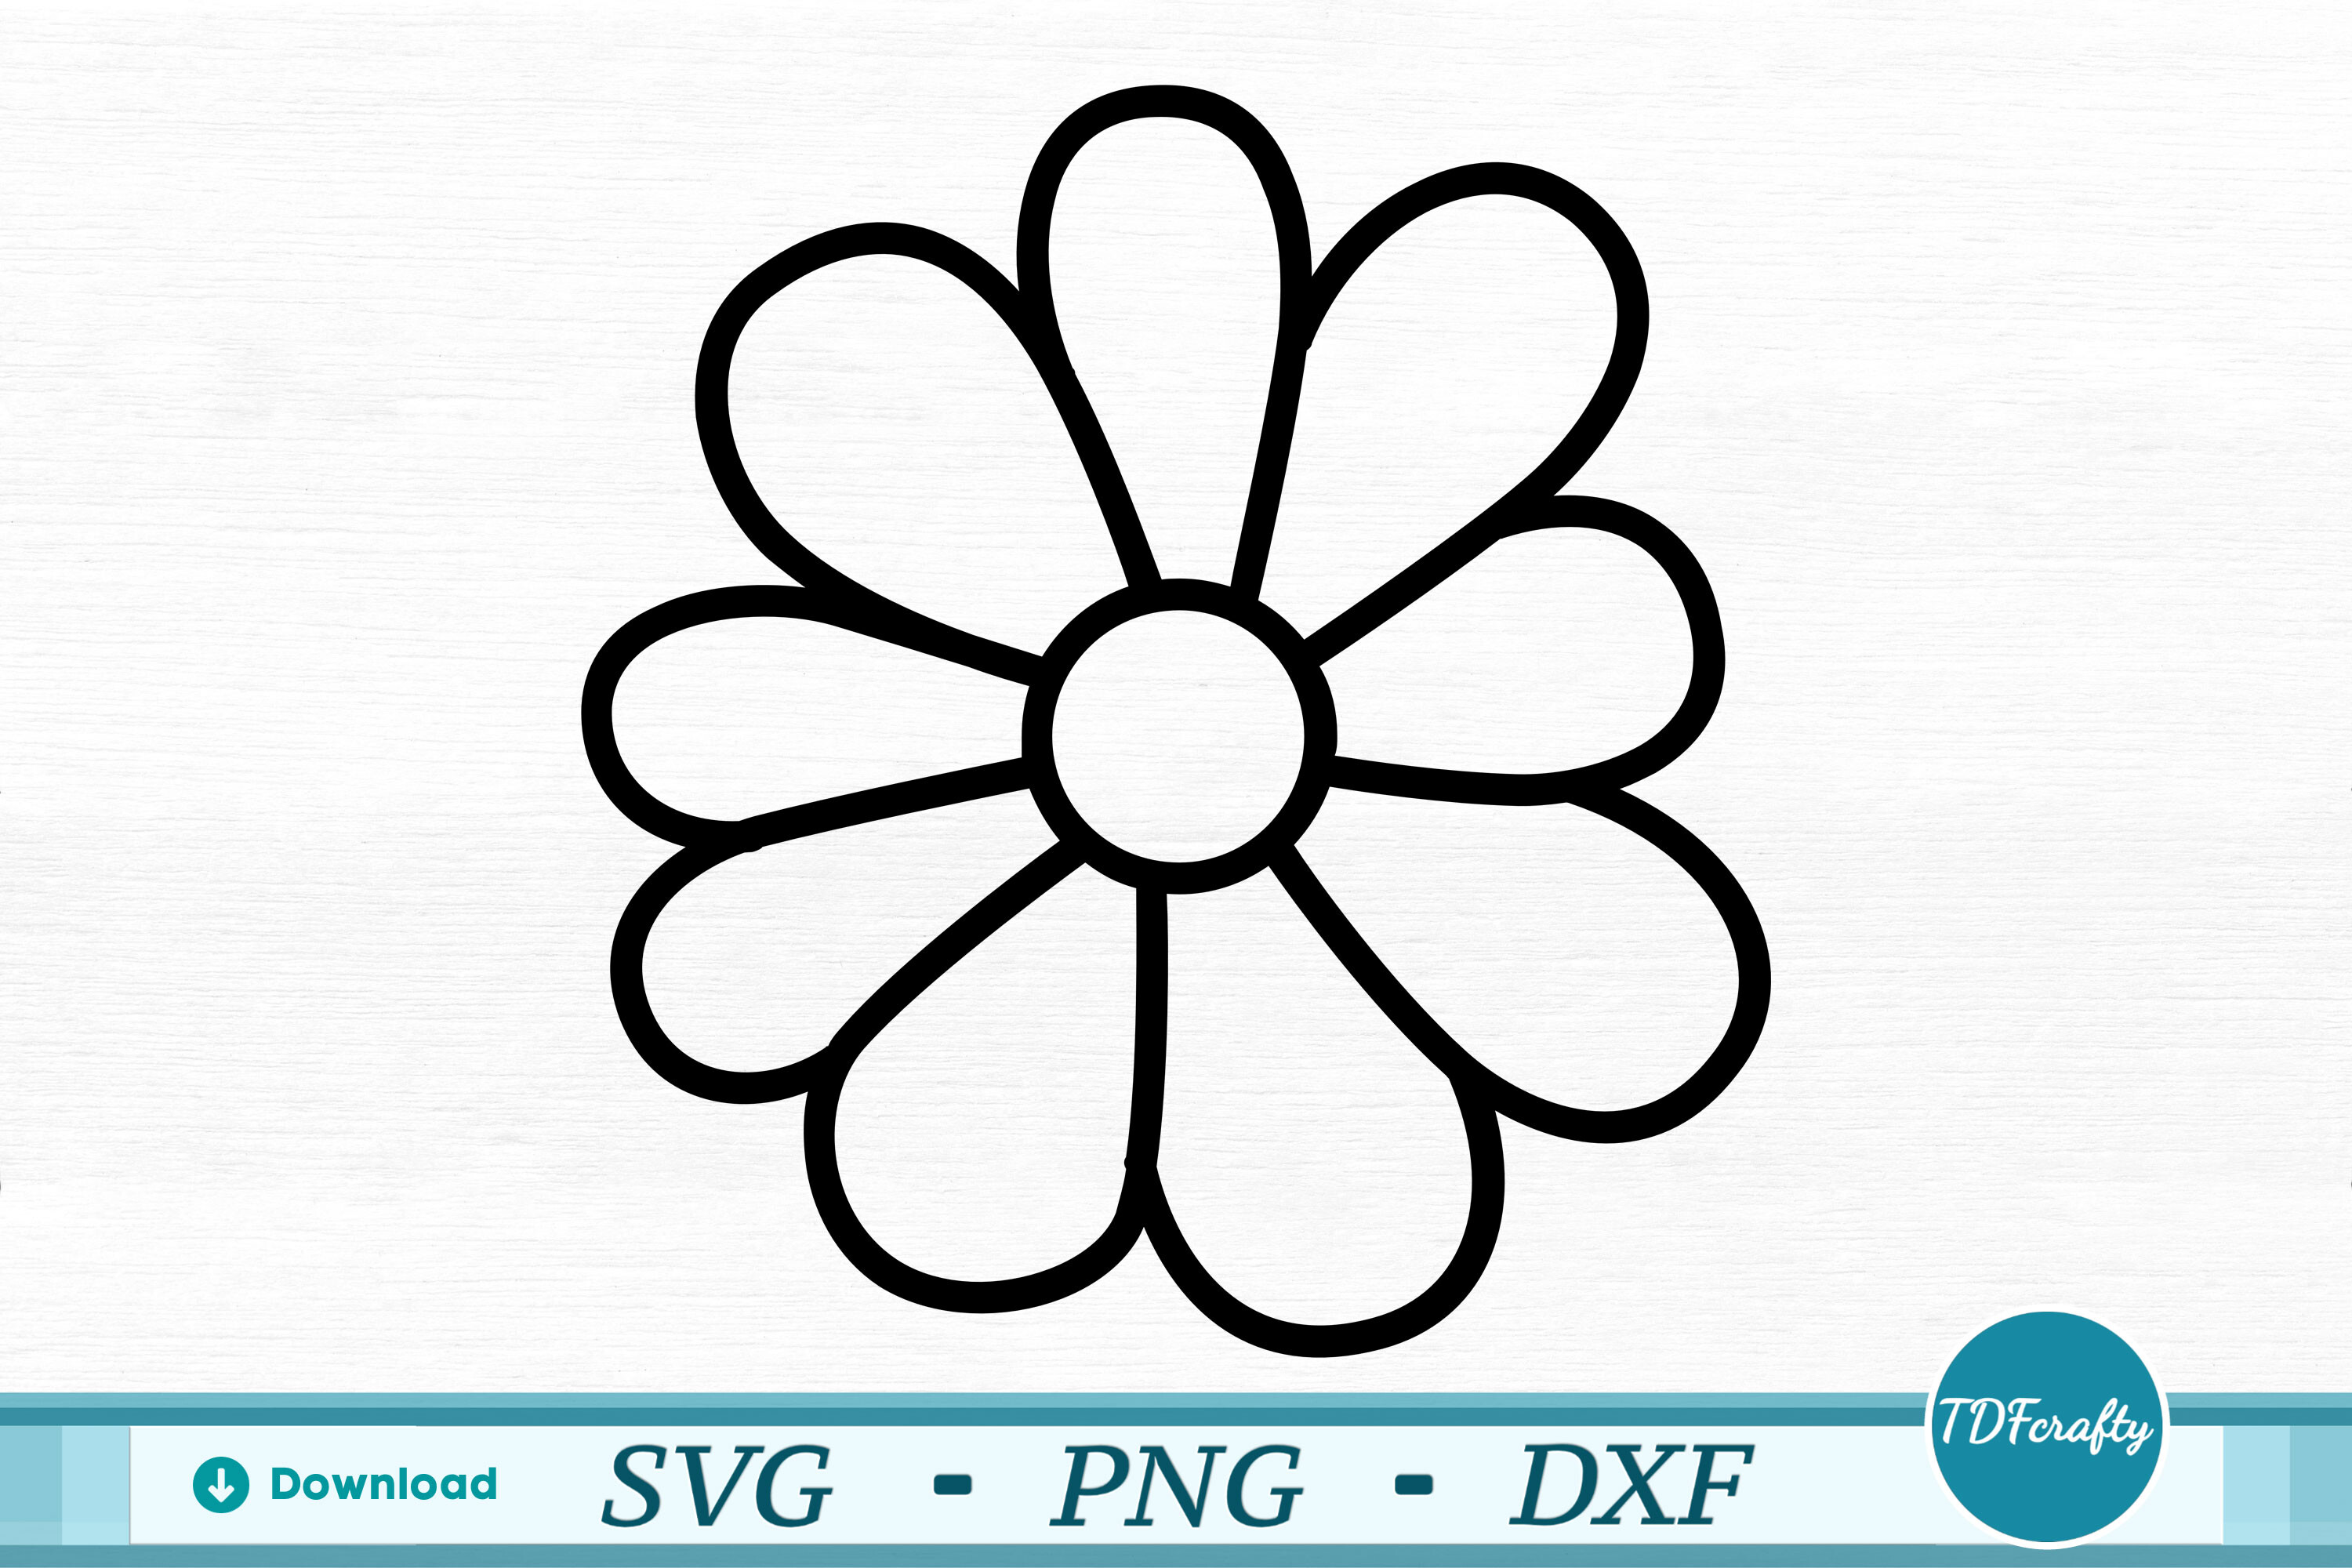 Flower Outline Graphic by TDFcrafty · Creative Fabrica